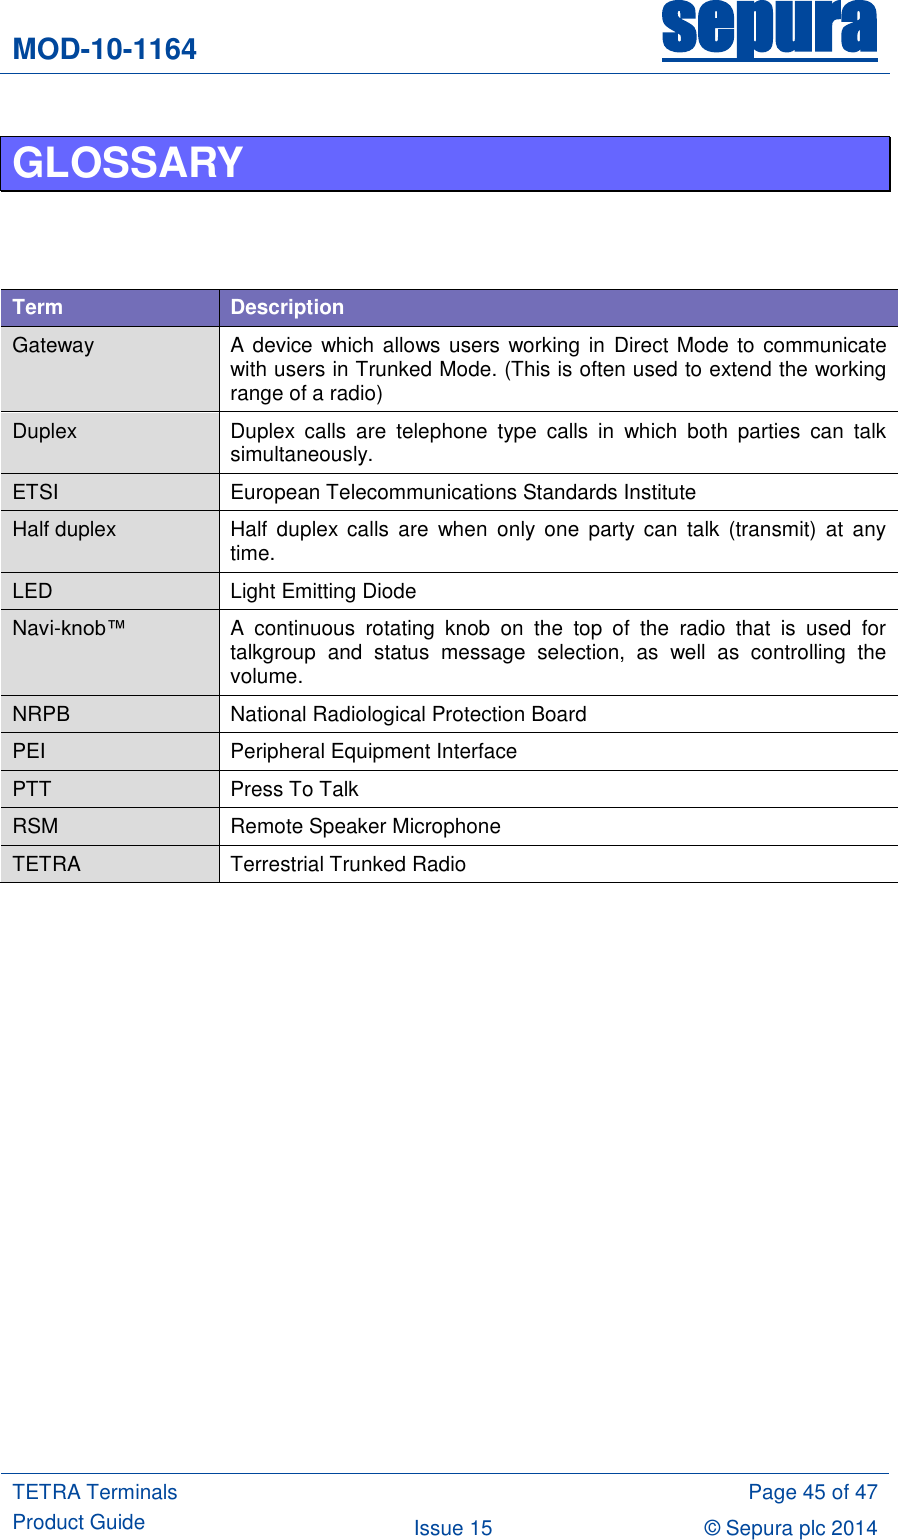 MOD-10-1164 sepura  TETRA Terminals Product Guide  Page 45 of 47 Issue 15 © Sepura plc 2014   GLOSSARY     Term Description Gateway A device which allows users working in  Direct Mode to communicate with users in Trunked Mode. (This is often used to extend the working range of a radio) Duplex Duplex  calls  are  telephone  type  calls  in  which  both  parties  can  talk simultaneously.  ETSI European Telecommunications Standards Institute Half duplex Half  duplex  calls  are  when  only  one  party can  talk  (transmit)  at  any time. LED Light Emitting Diode Navi-knob™  A  continuous  rotating  knob  on  the  top  of  the  radio  that  is  used  for talkgroup  and  status  message  selection,  as  well  as  controlling  the volume. NRPB National Radiological Protection Board PEI Peripheral Equipment Interface PTT Press To Talk RSM Remote Speaker Microphone TETRA Terrestrial Trunked Radio     